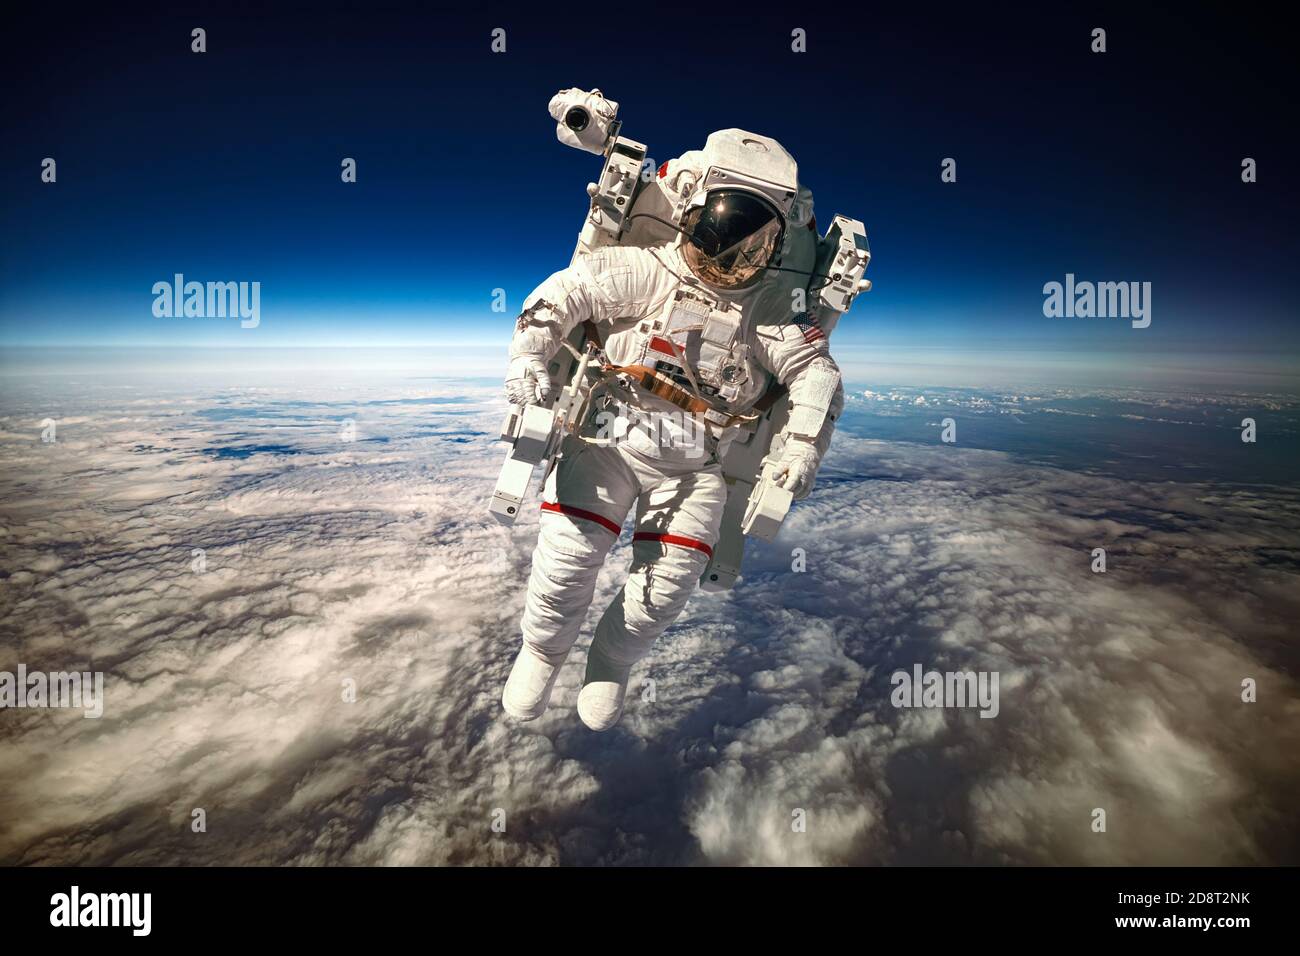 Astronaut in outer space against the backdrop of the planet earth. Elements of this image furnished by NASA. Stock Photo